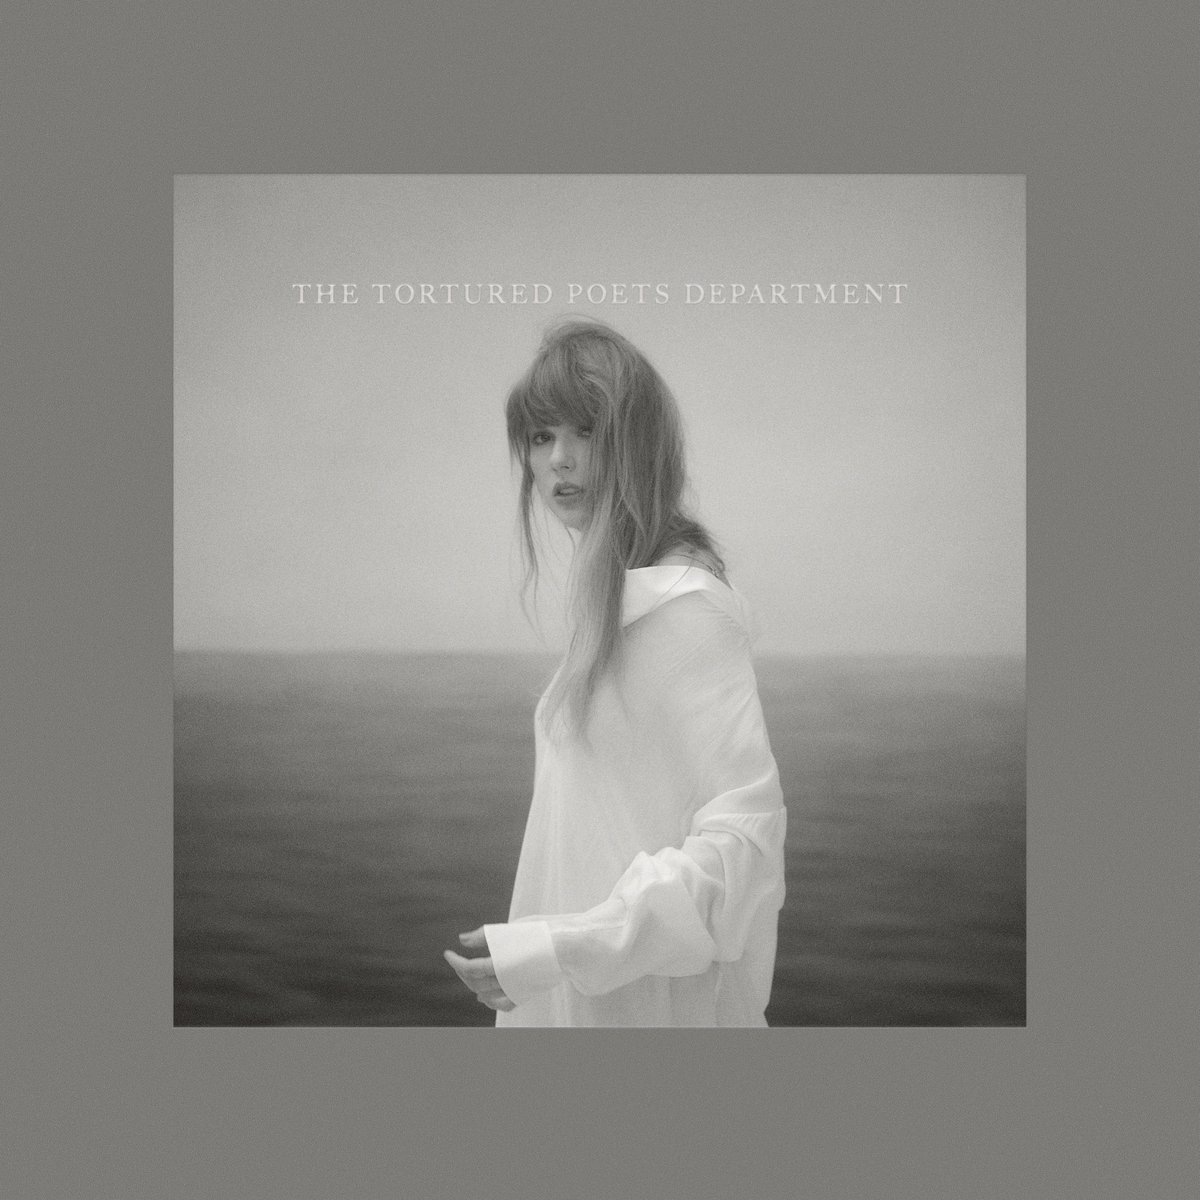 @taylorswift13: File Name: The Albatross 🤍 Pre-order the new edition of THE TORTURED POETS DEPARTMENT with exclusive bonus track “The Albatross”on my website now